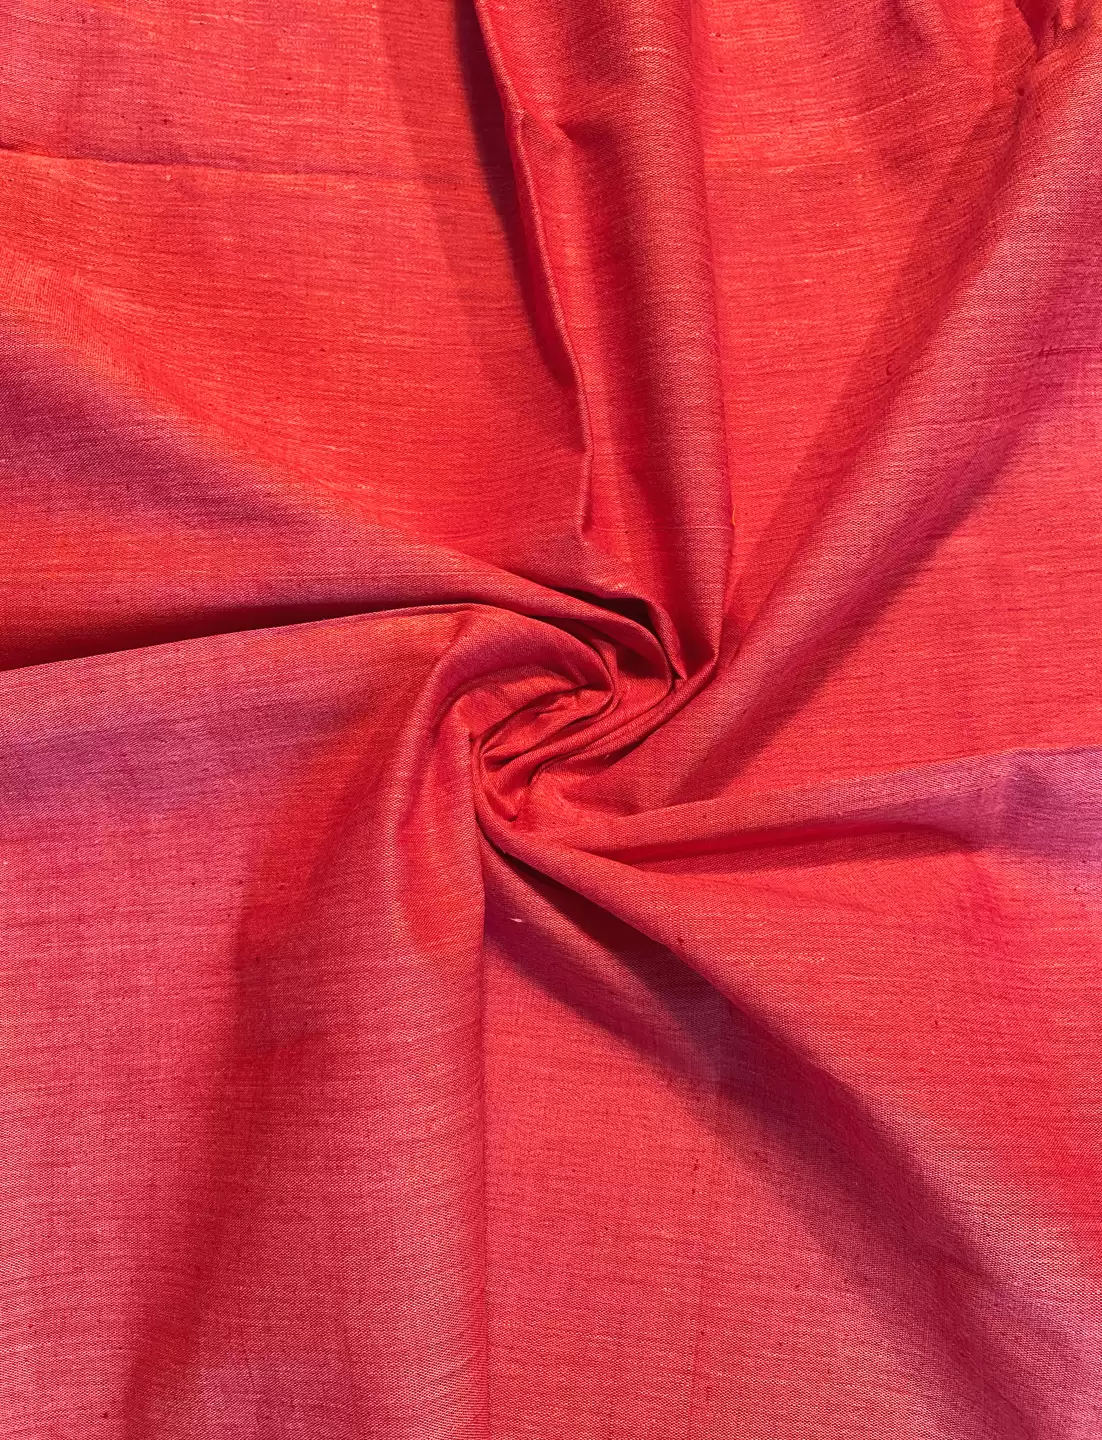 PURE COTTON KHADI PLAIN COLOR SHIRTING FABRIC 44 Inches (Length 2.30 Meter)